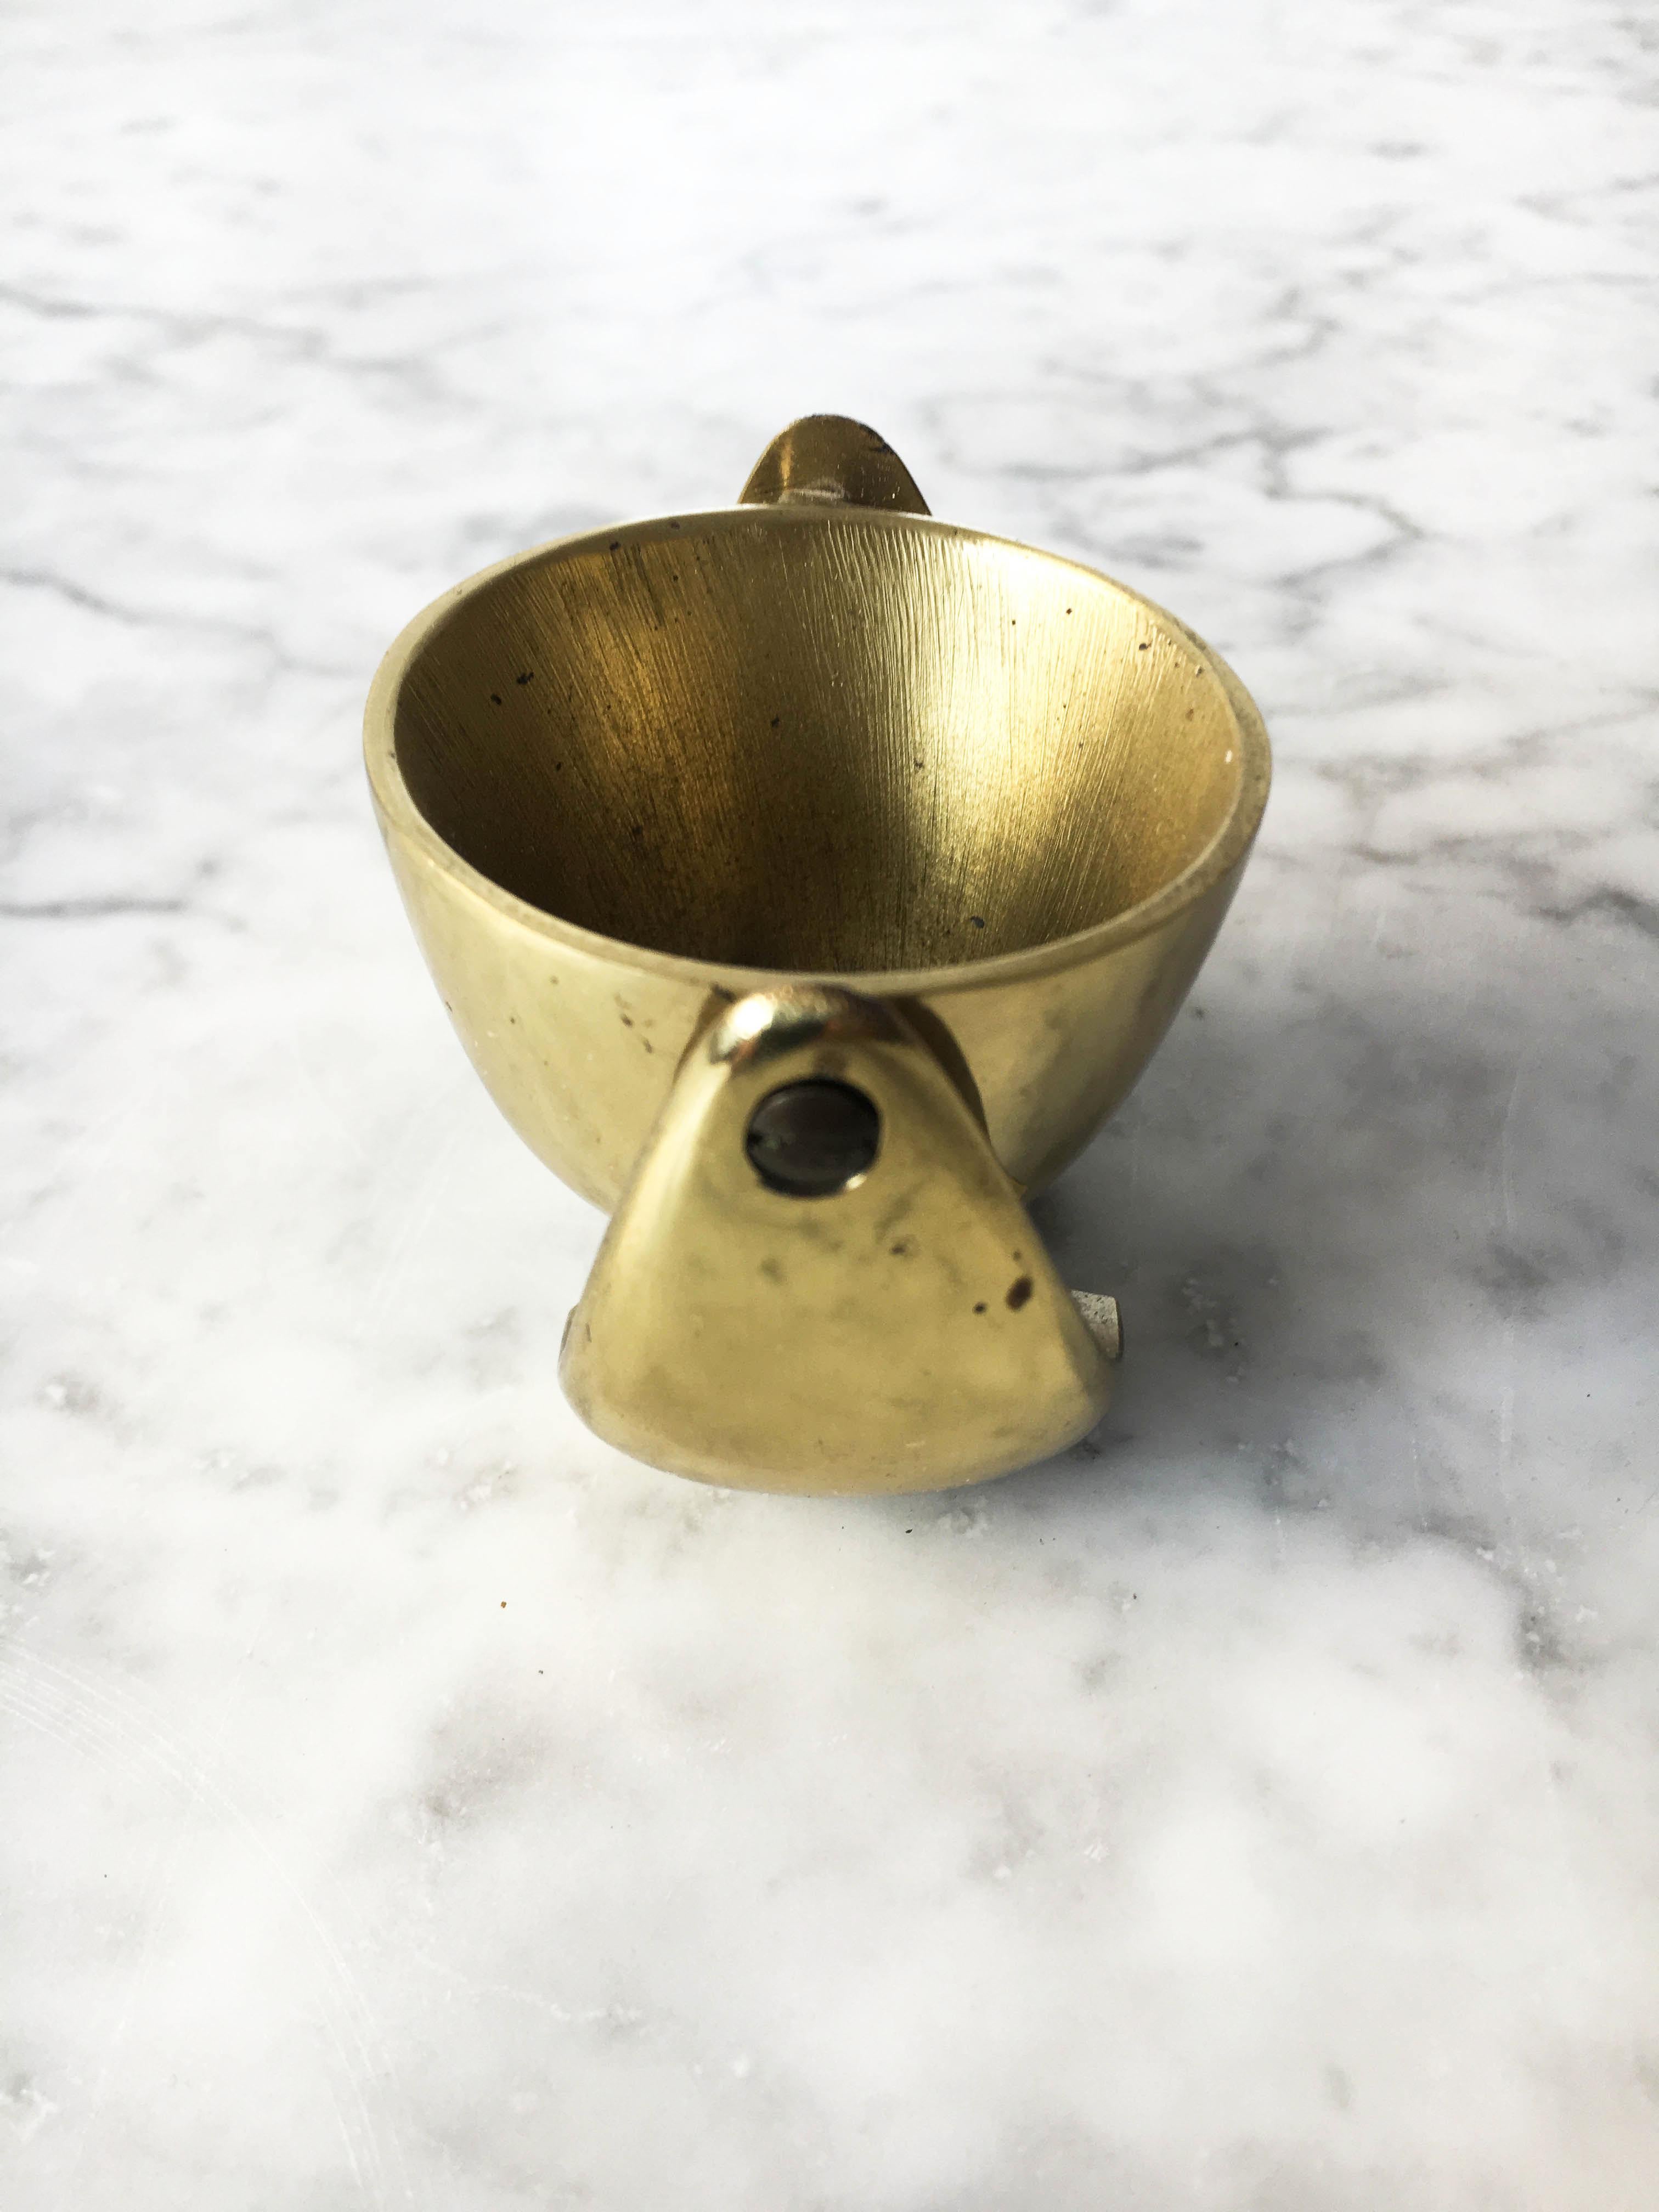 A beautiful modernist egg cup and design object made at the Werkstätte Carl Auböck. The Minimalist sculptural shape is made in solid brass. In excellent condition with just the right amount of lovely gently aged patina on the brass. Signed Auböck.